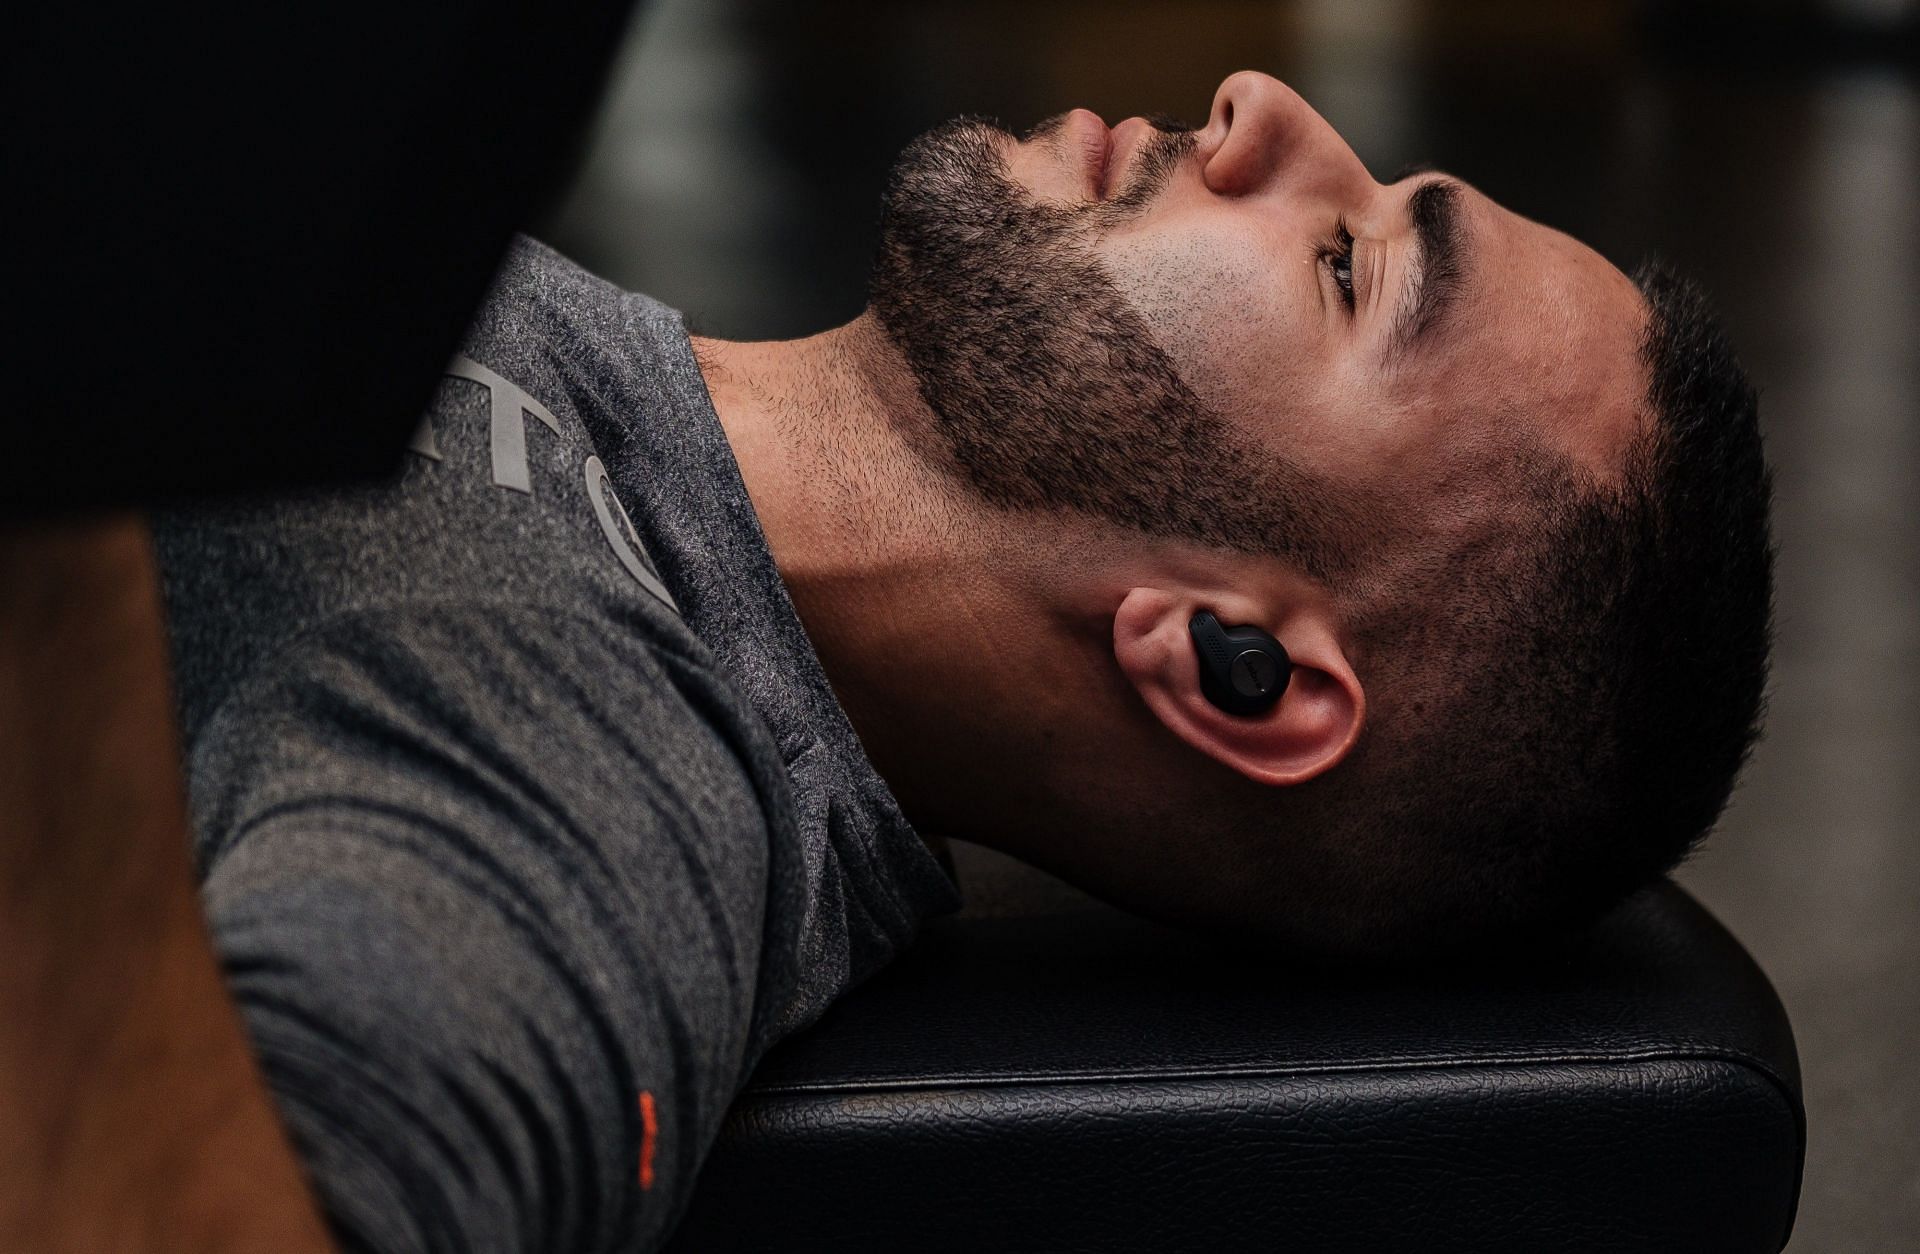 The flat bench is the most basic type of weight bench and the one most commonly found in gyms. (Photo by Mister Mister/pexels)